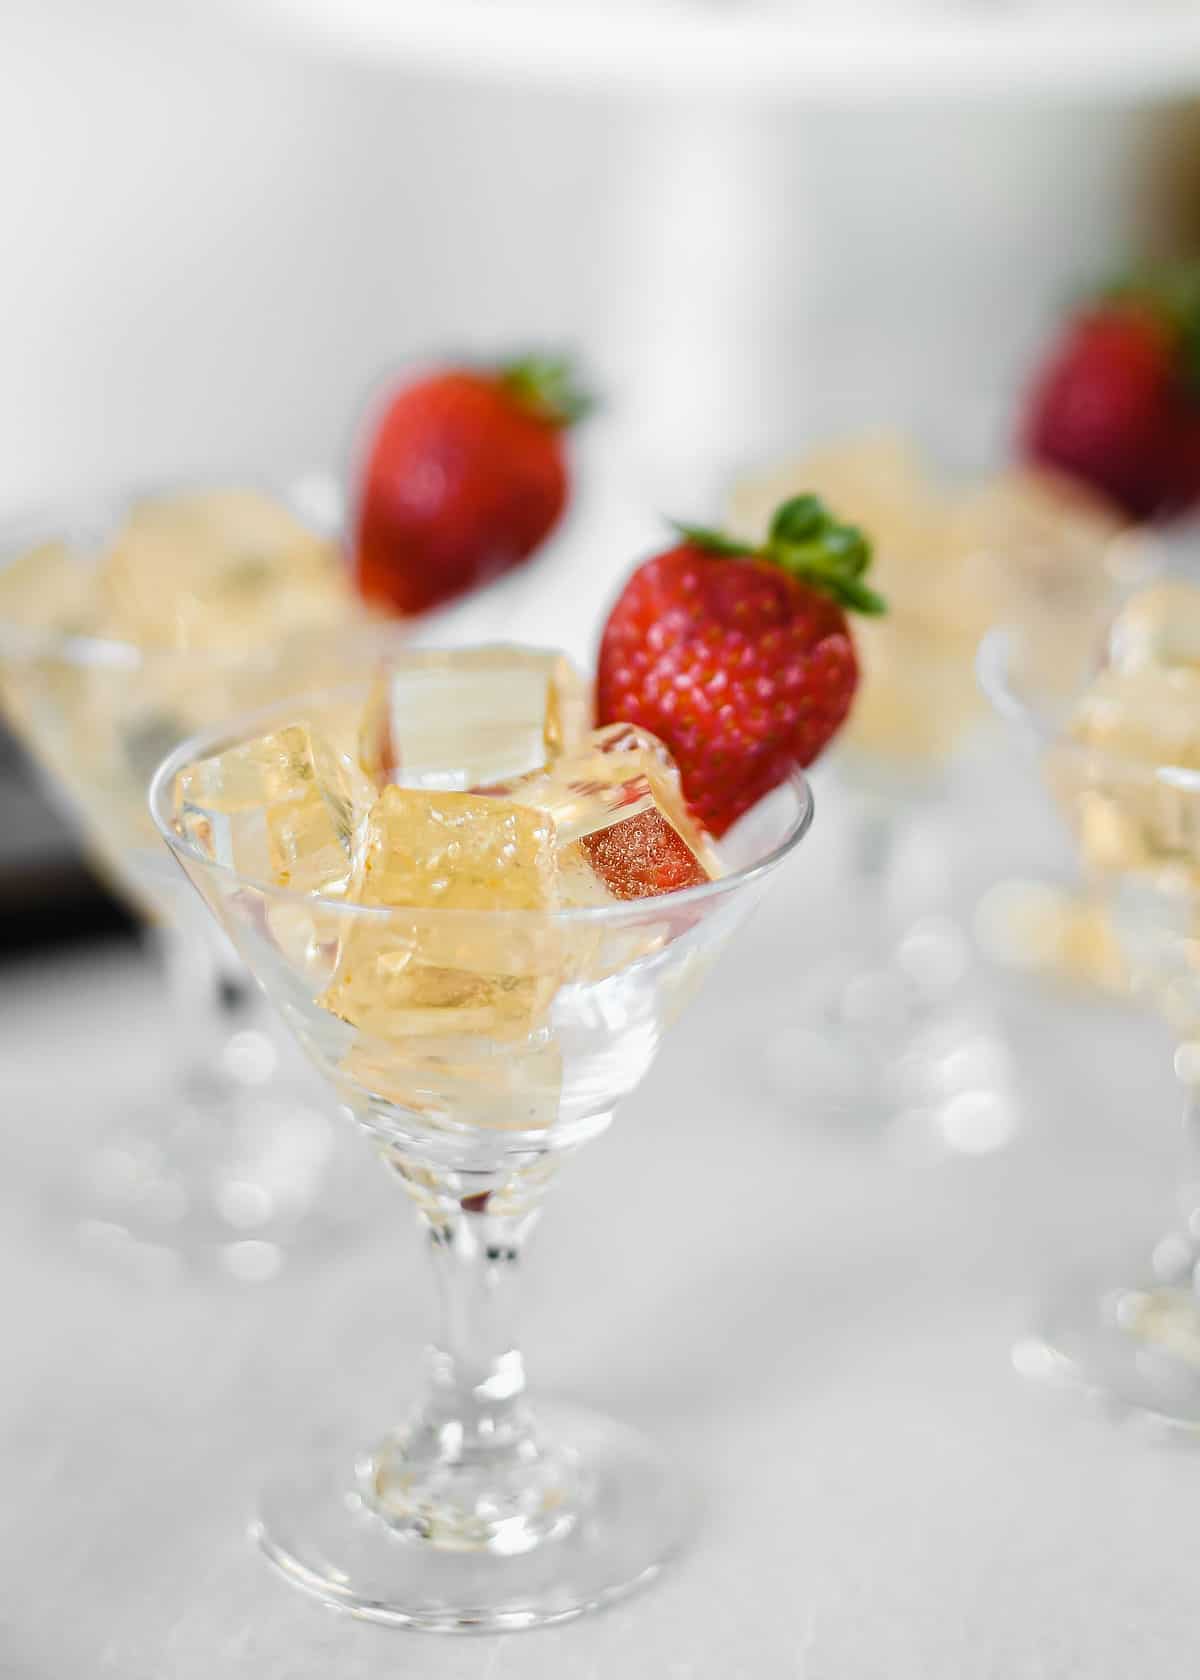 mini martini glasses with strawberry garnish on the side, filled with golden colored jello squares.